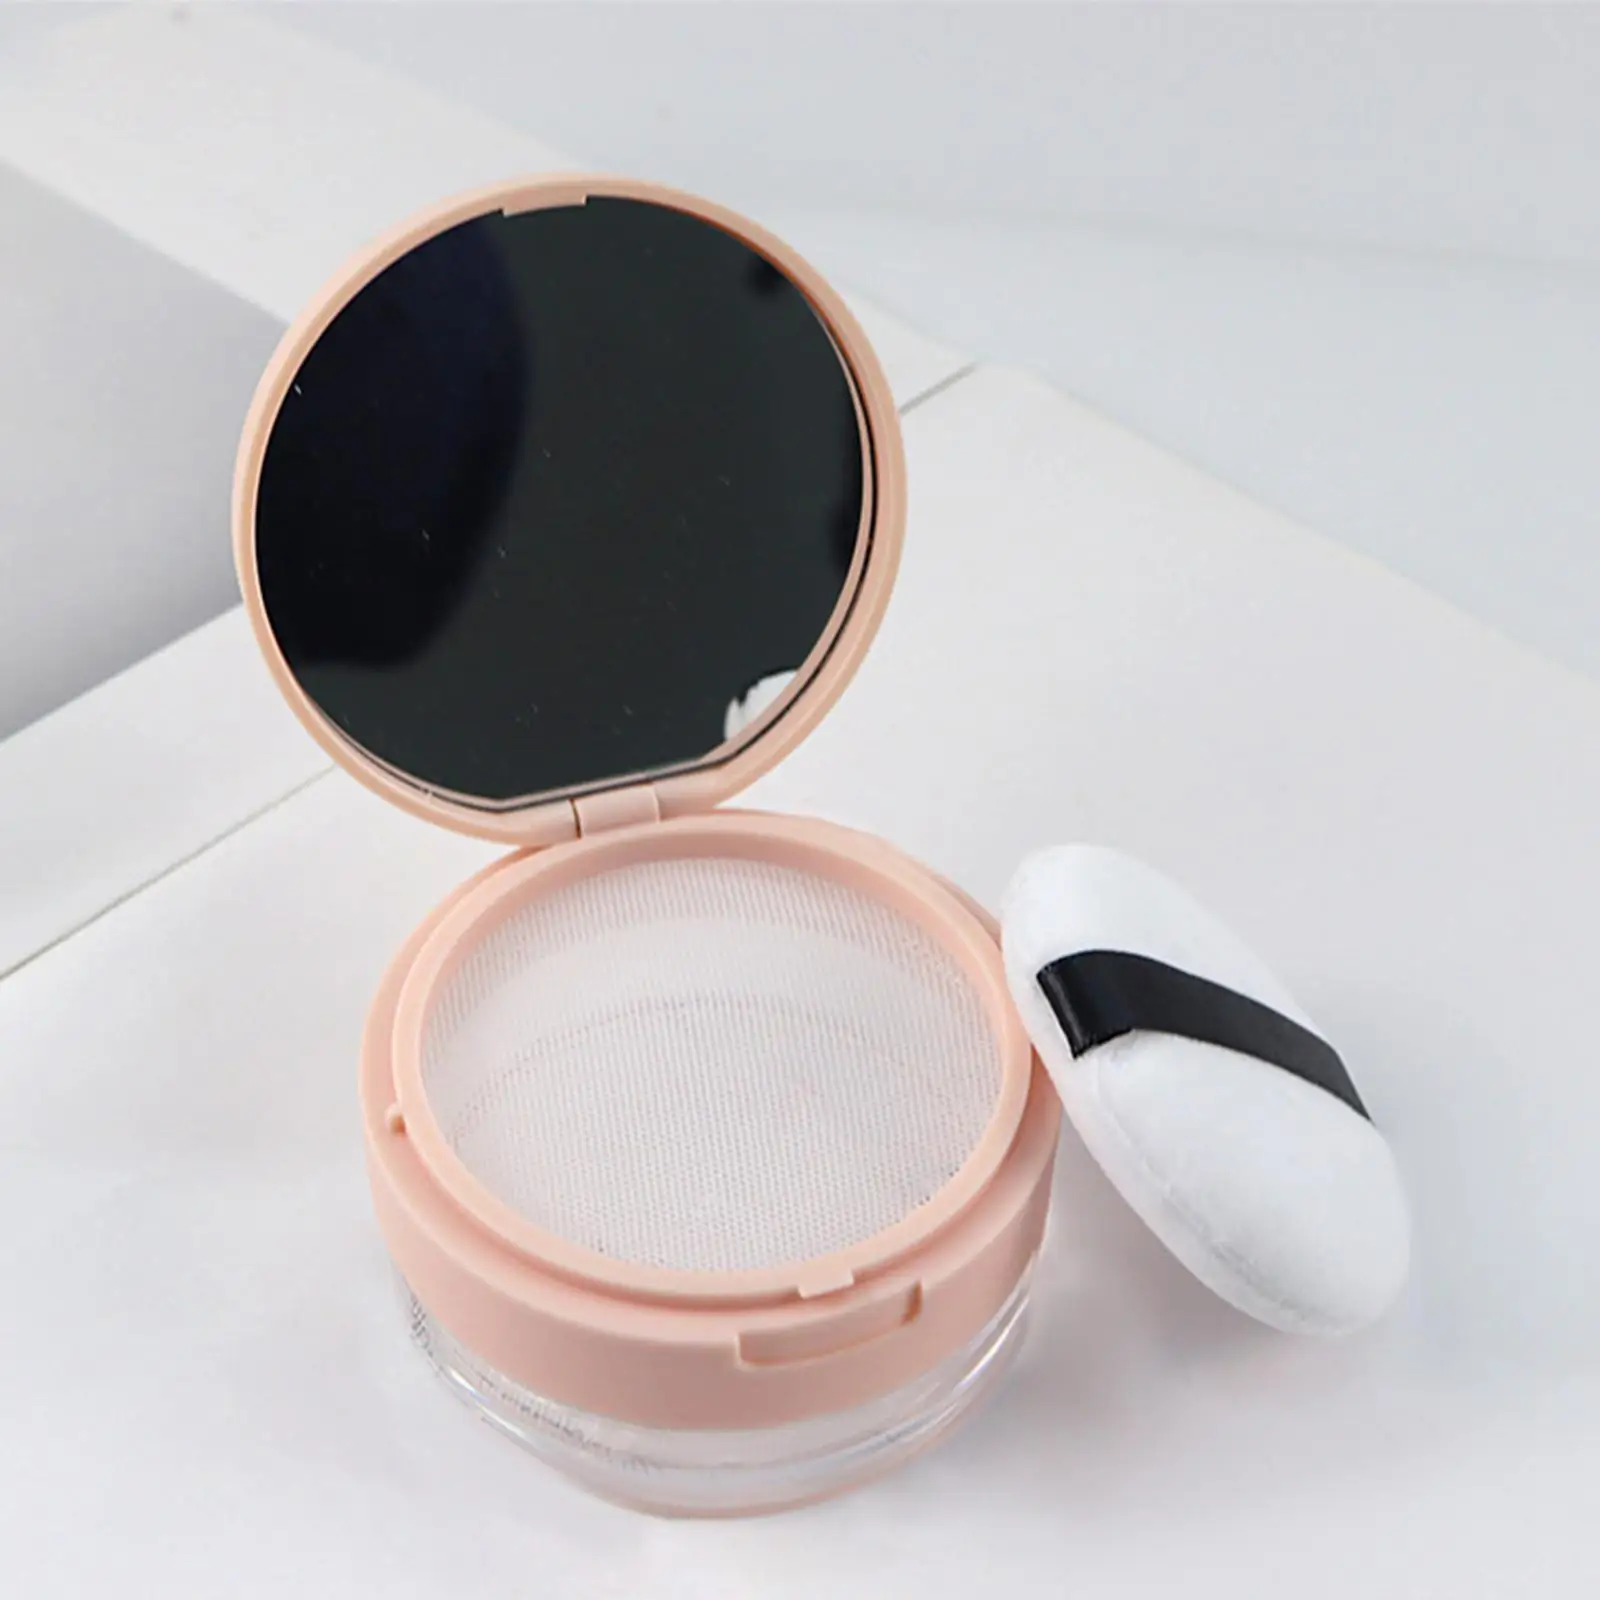 0.7 oz Loose Powder Container with Puff Reusable Compact Elasticated Net Sifter Portable Powder Box with Mirror for Blush Women